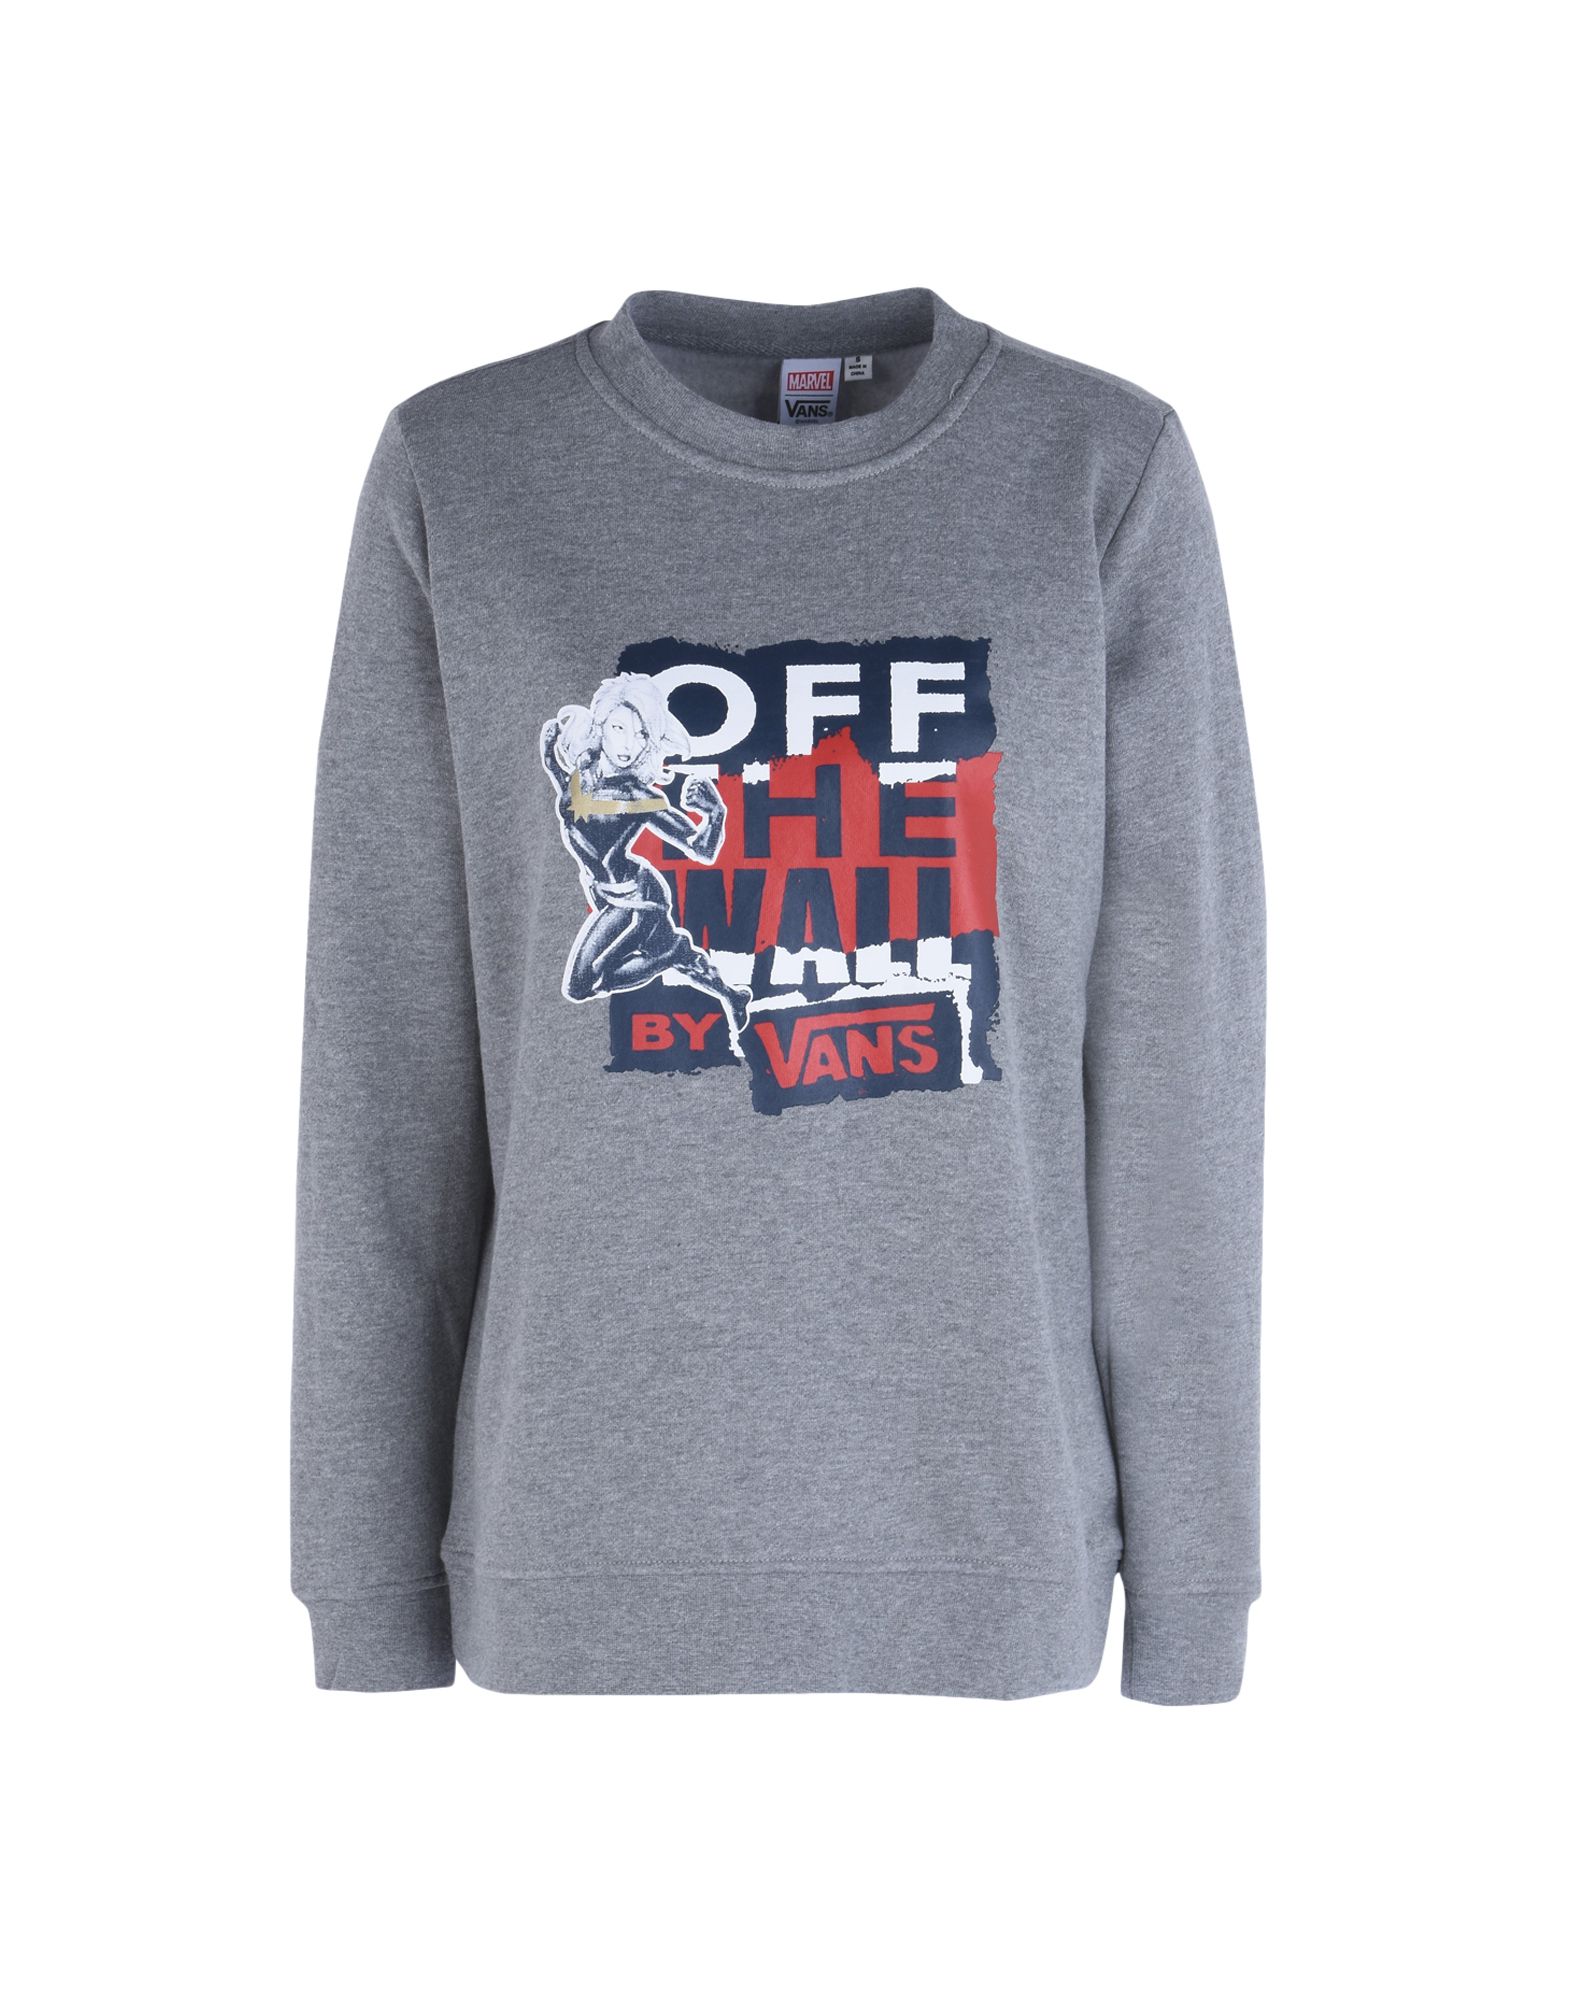 VANS TECHNICAL SWEATSHIRTS AND SWEATERS,12191838MH 3